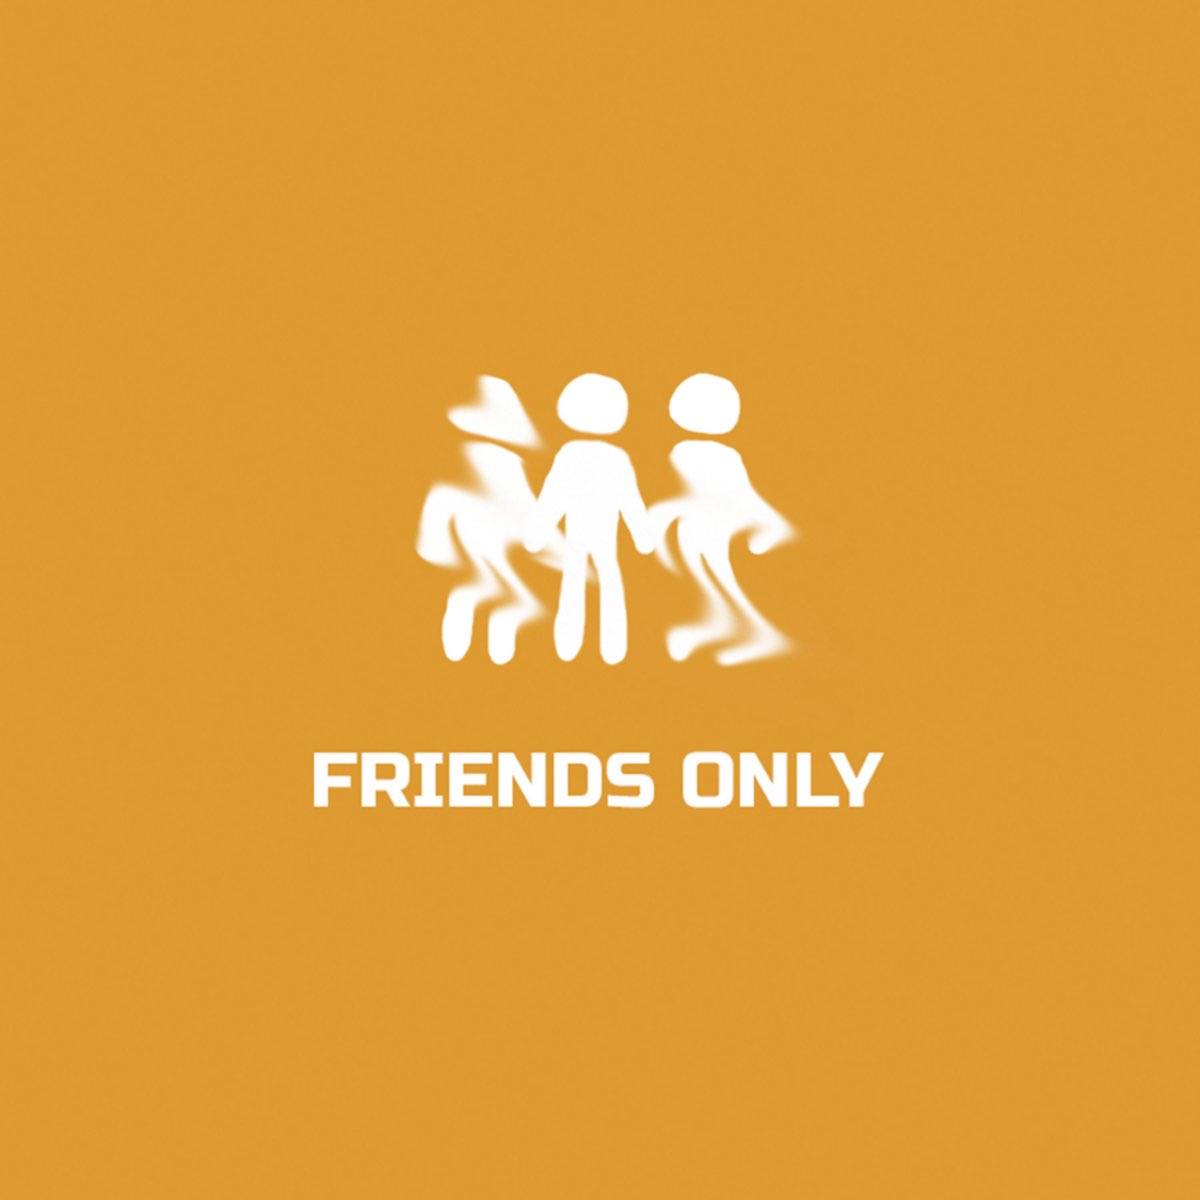 Best friends only. Онли френдс. Only friends. Be only friends.